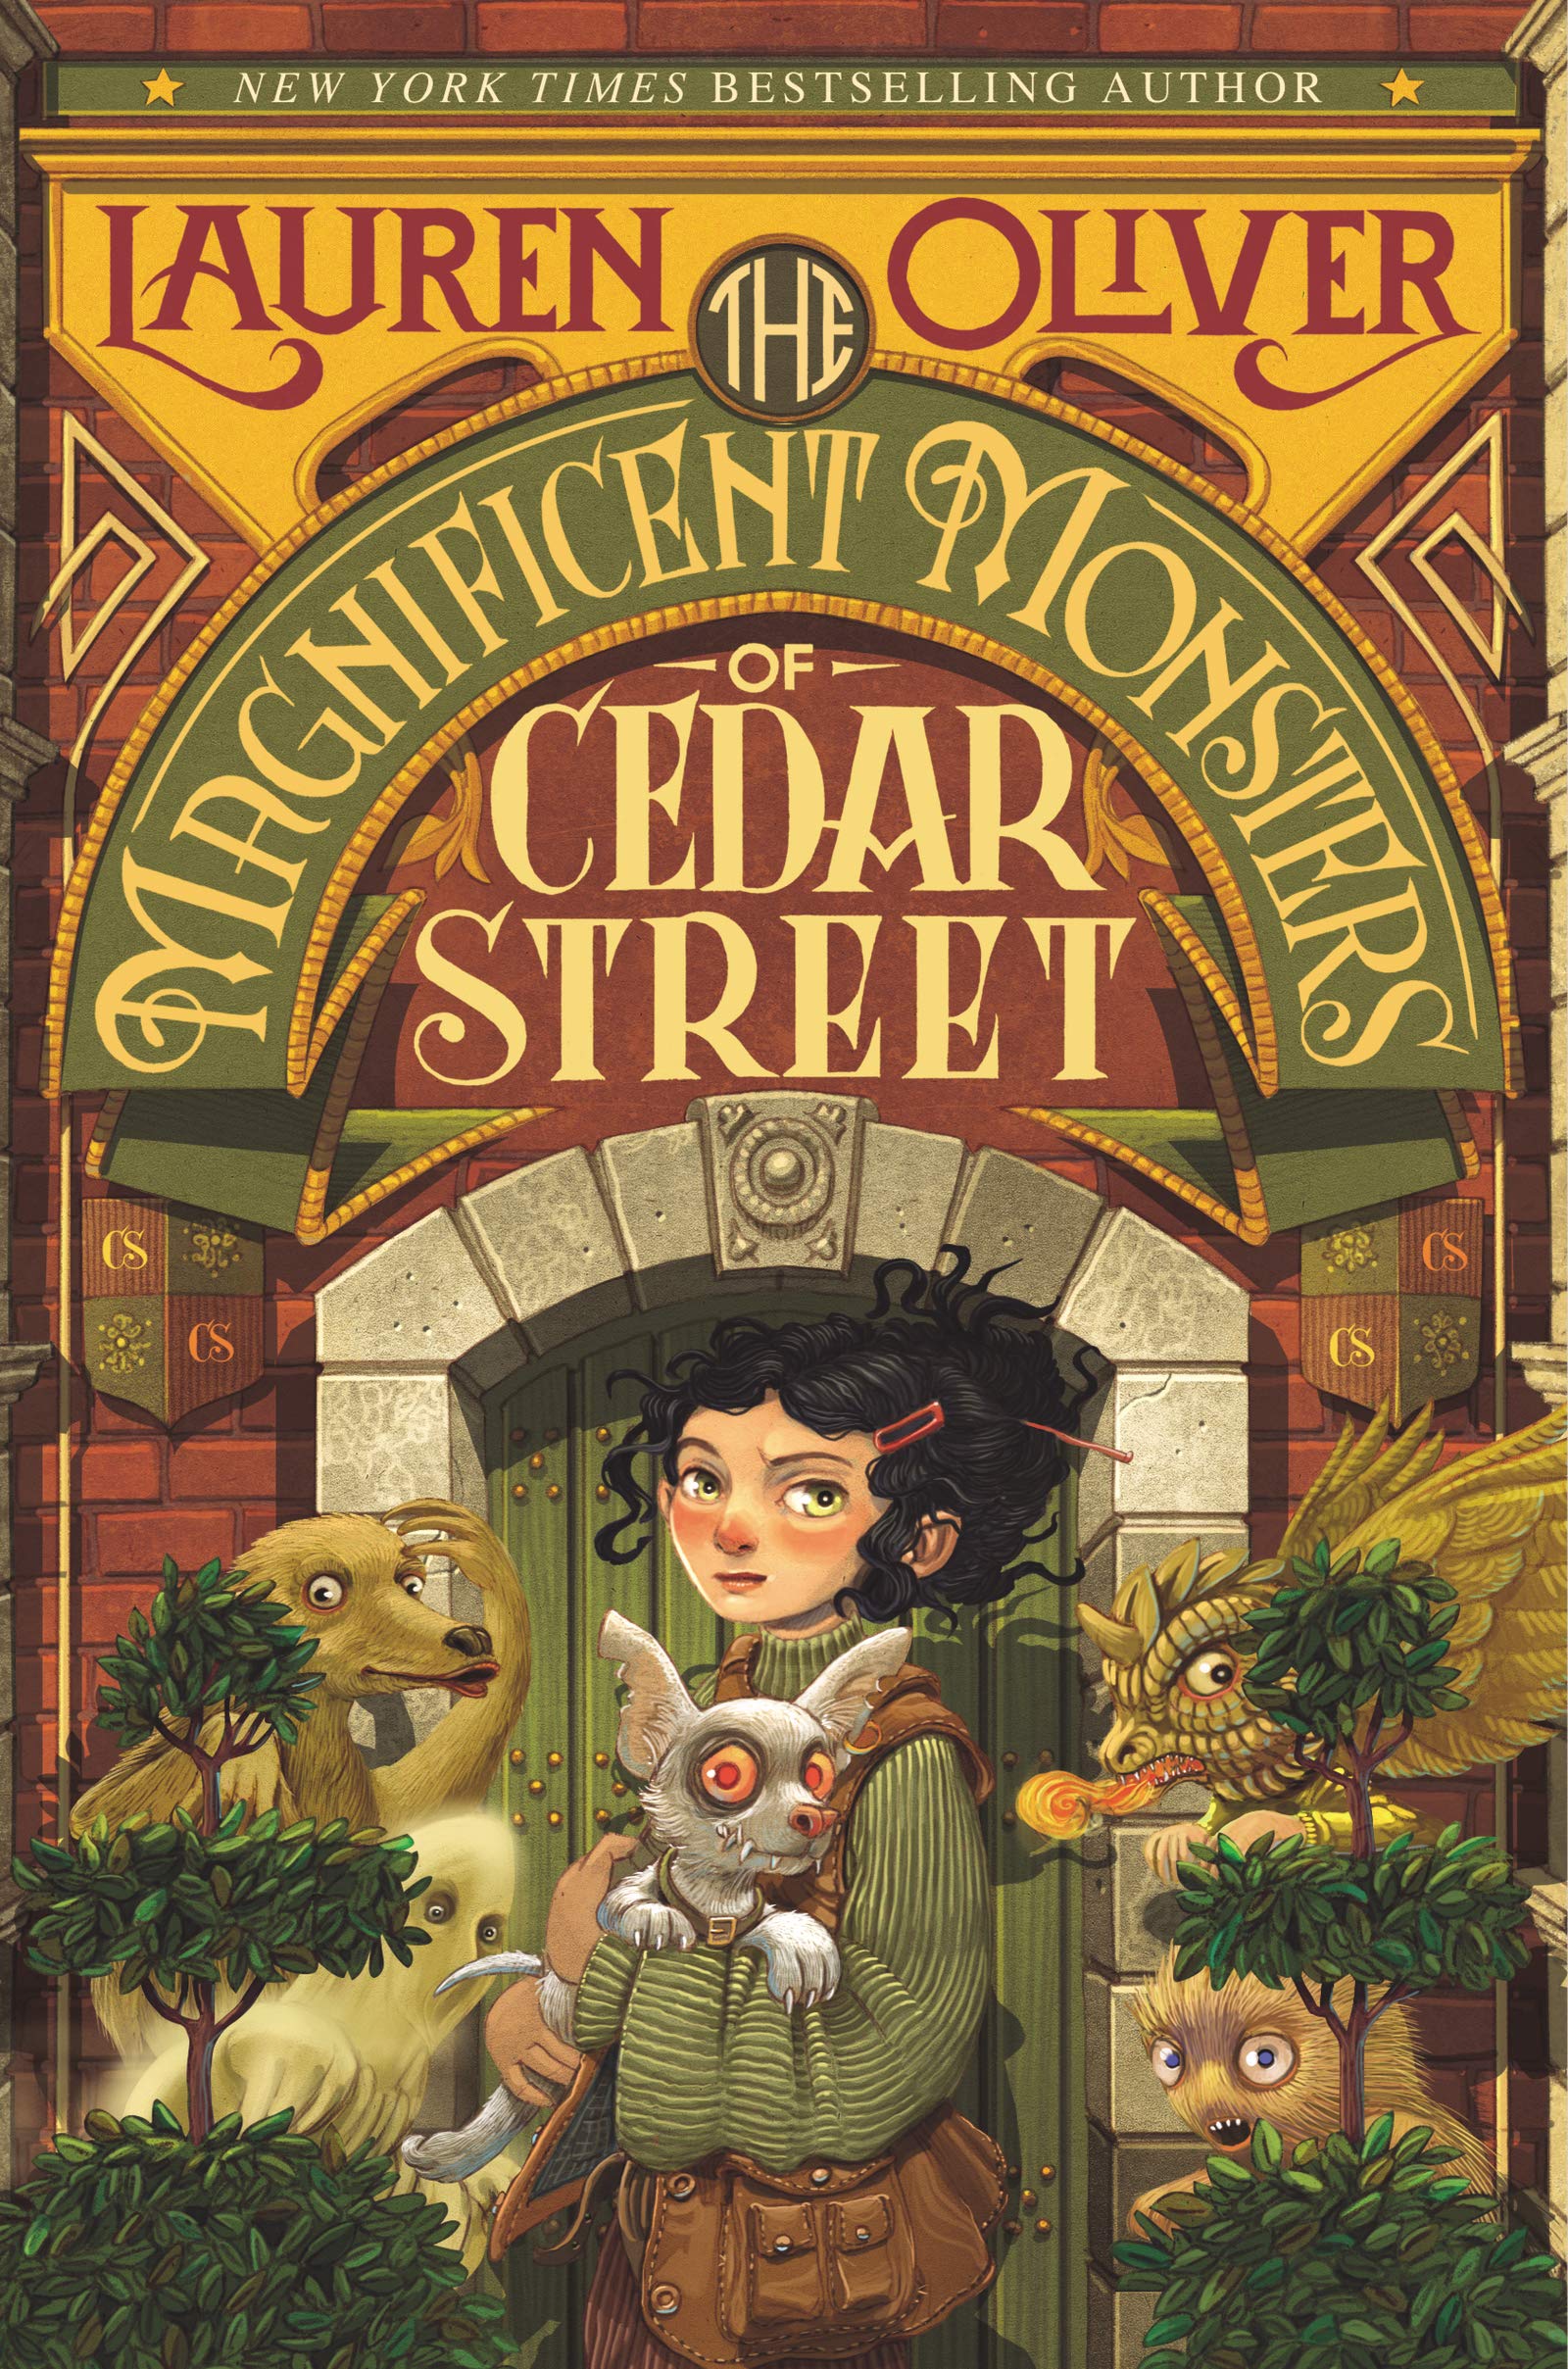 The Magnificent Monsters Of Cedar Street Release Date? 2020 Middle Grade Book Releases